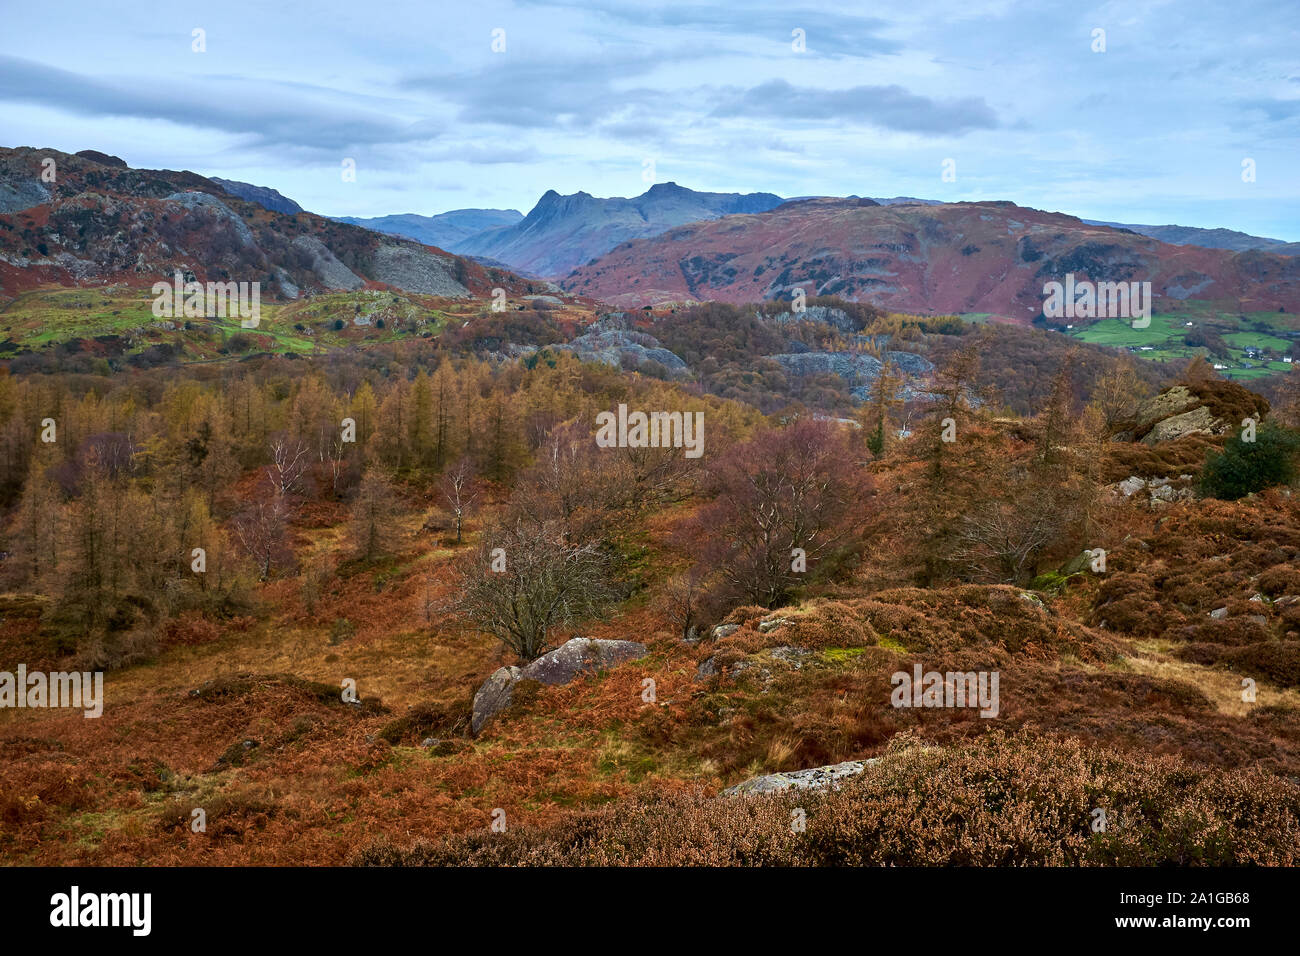 A spectacular winter view of The Holme Fells looking towards Great Langdale in The Lake District, England, UK Stock Photo